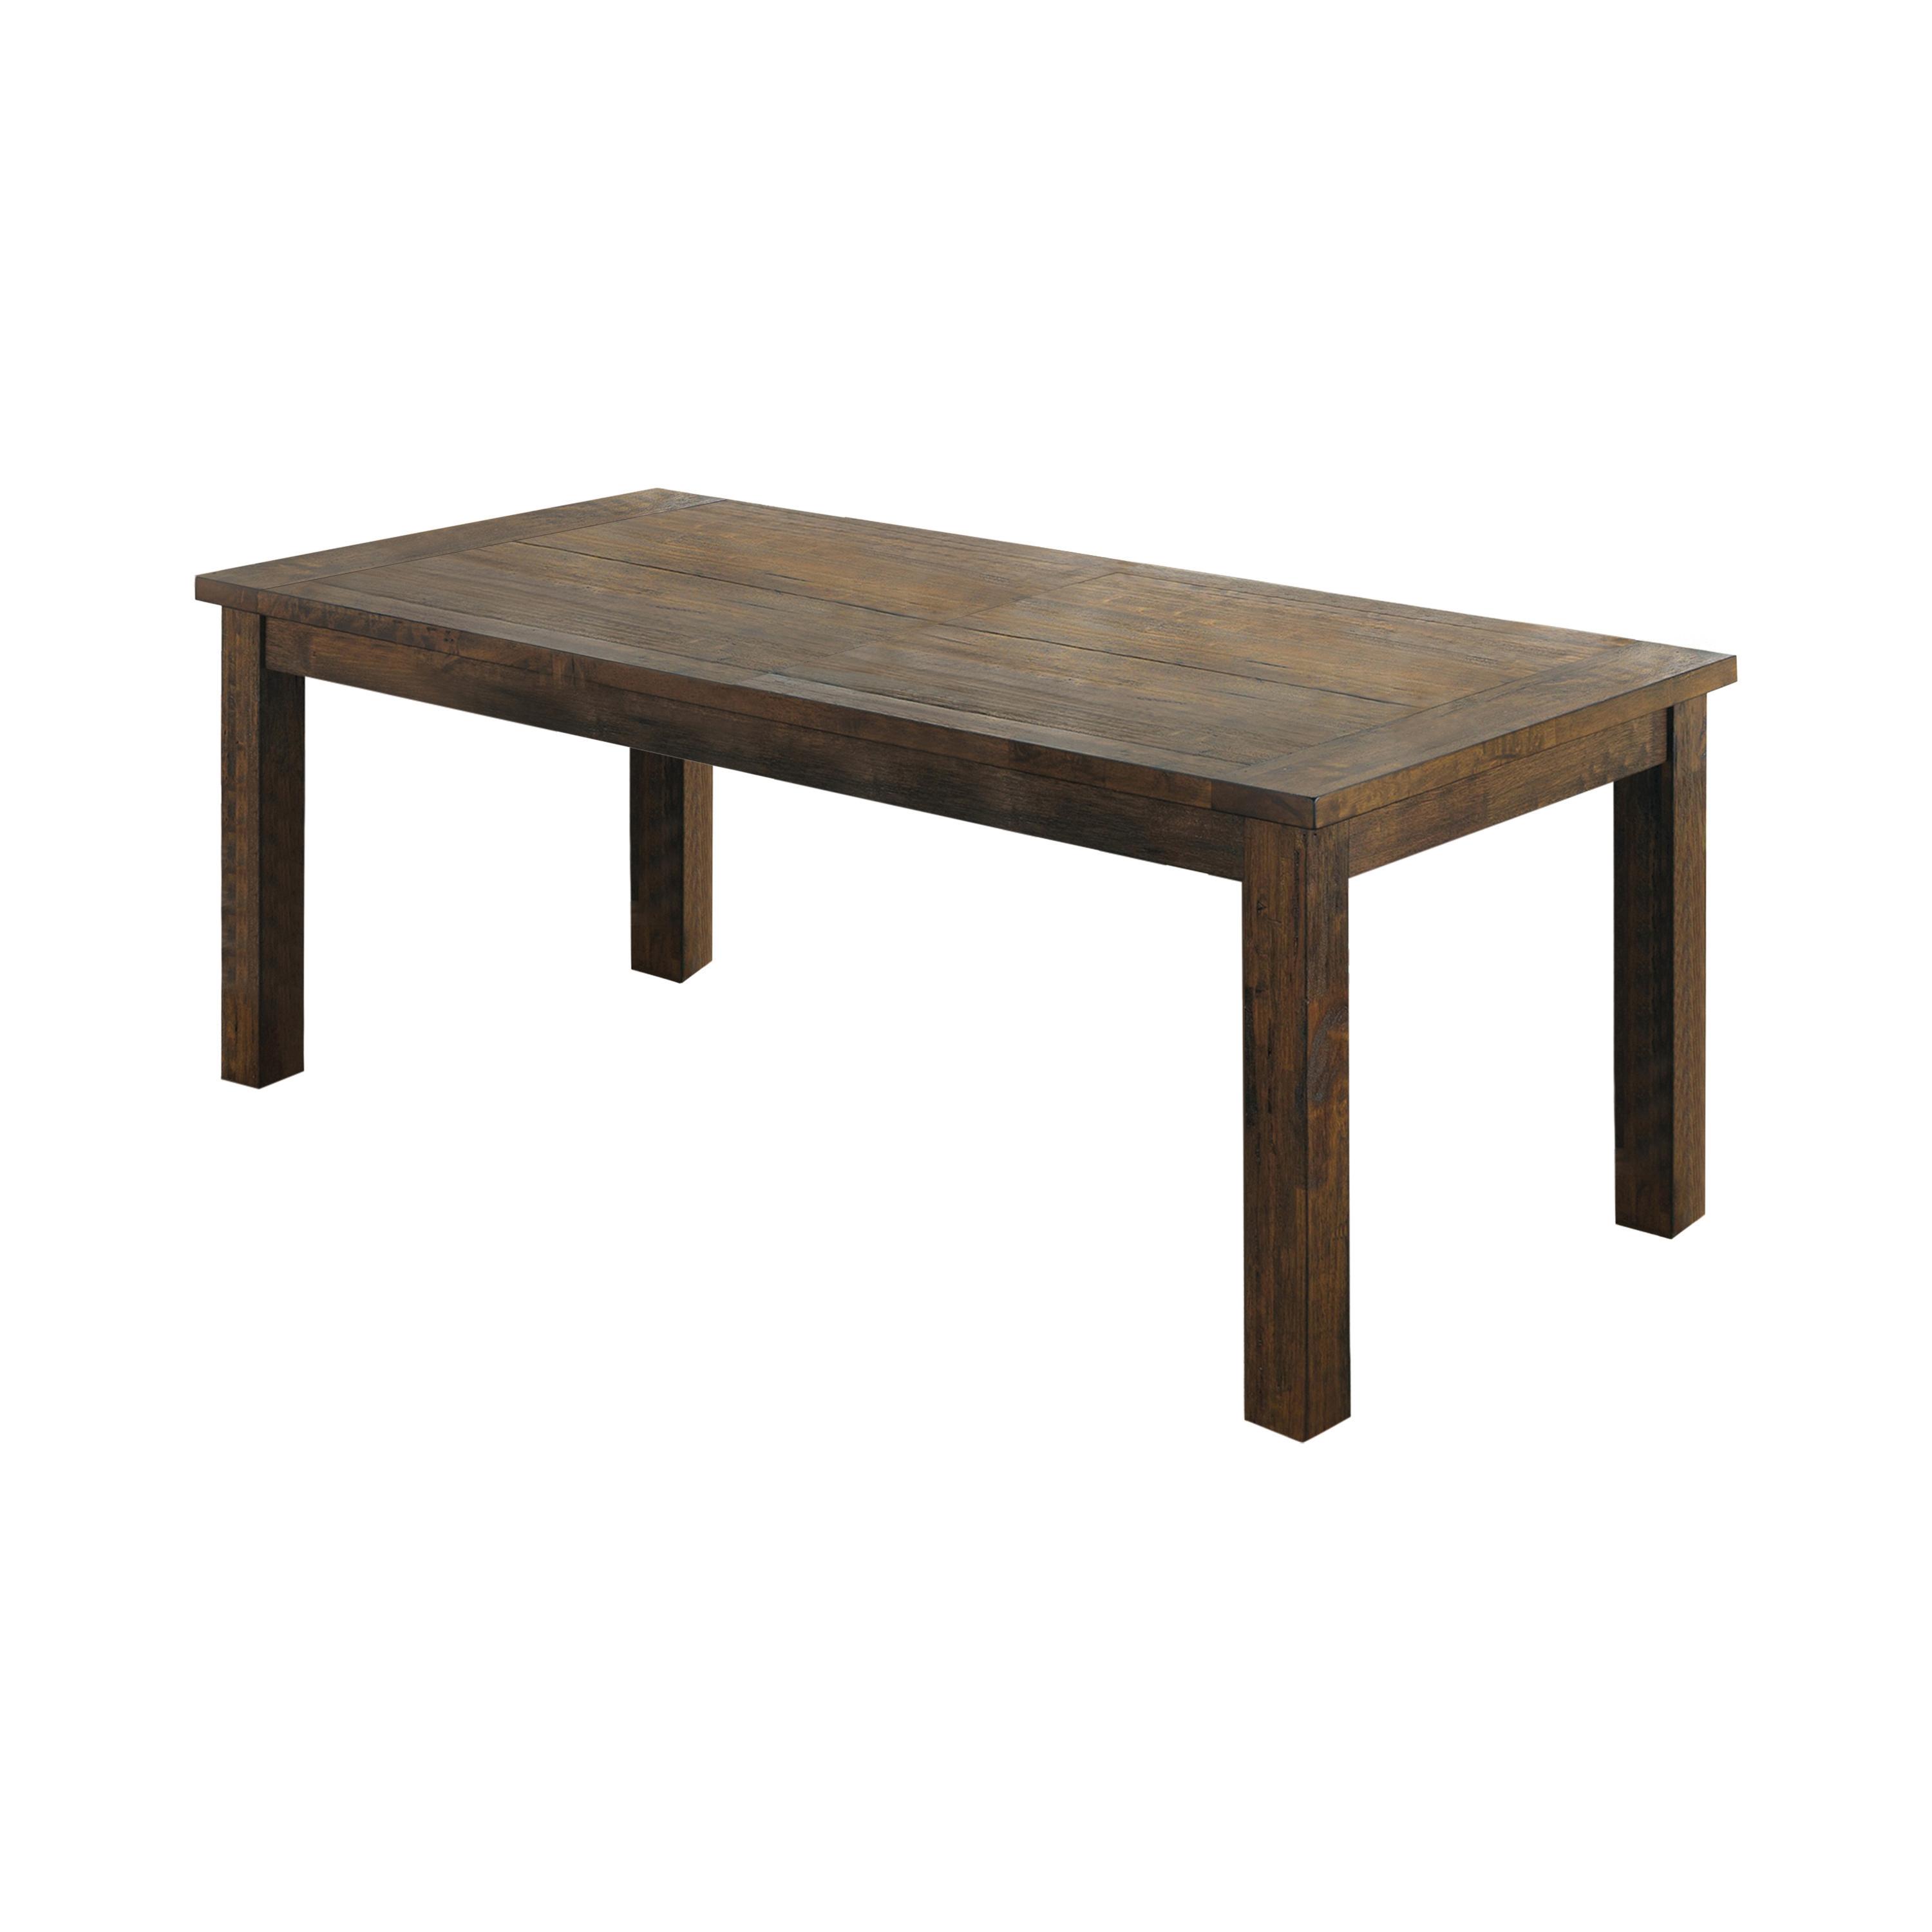 Farmhouse Dining Table 107041 Coleman 107041 in Golden Brown 